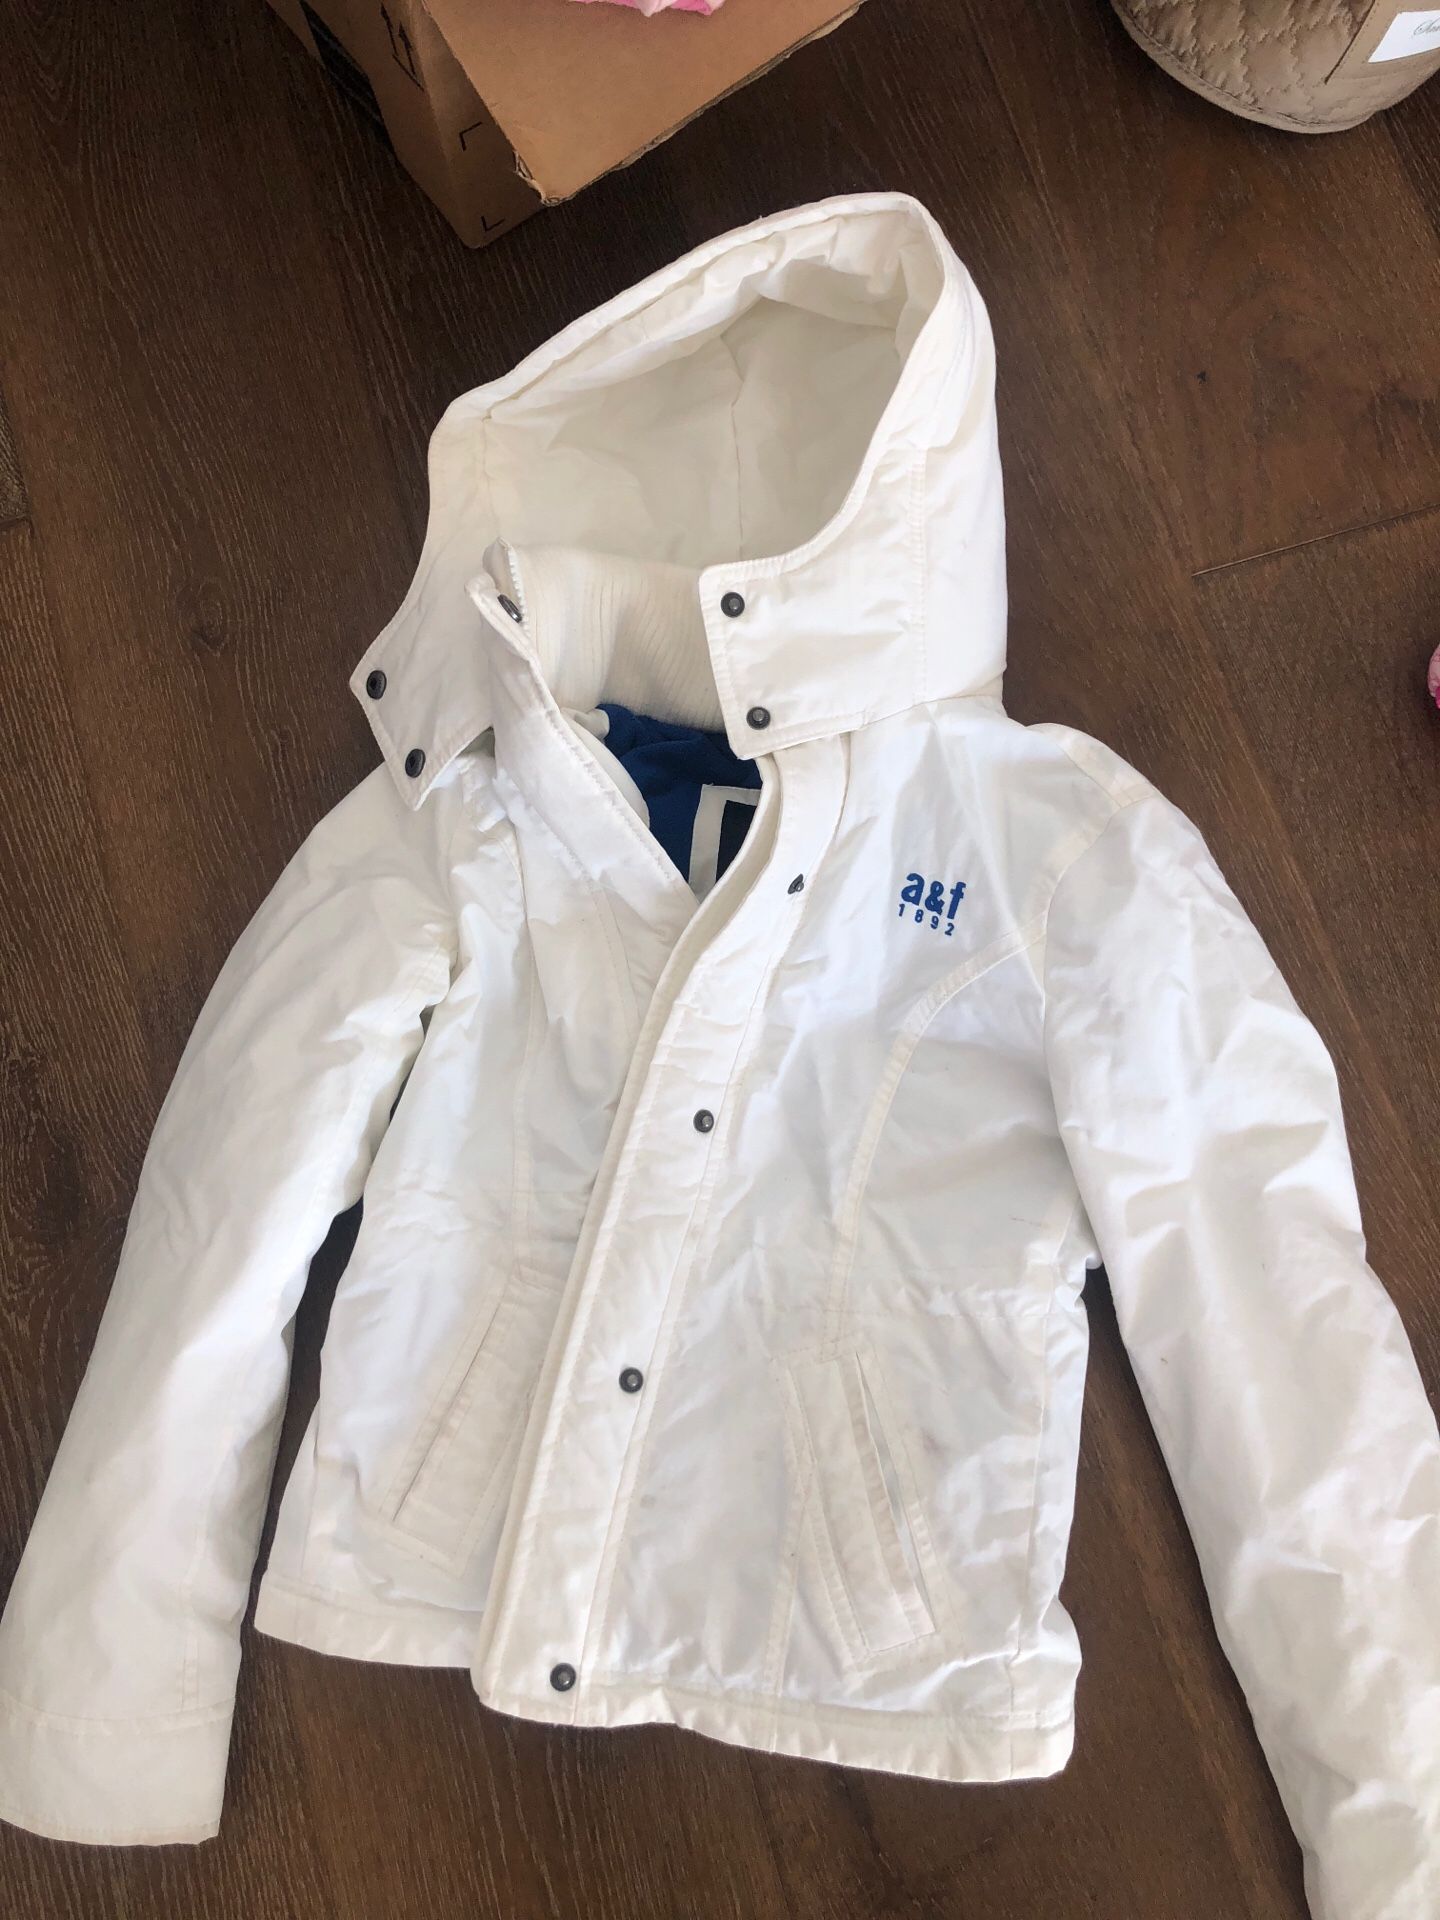 Abercrombie and Fitch - Girls Jacket